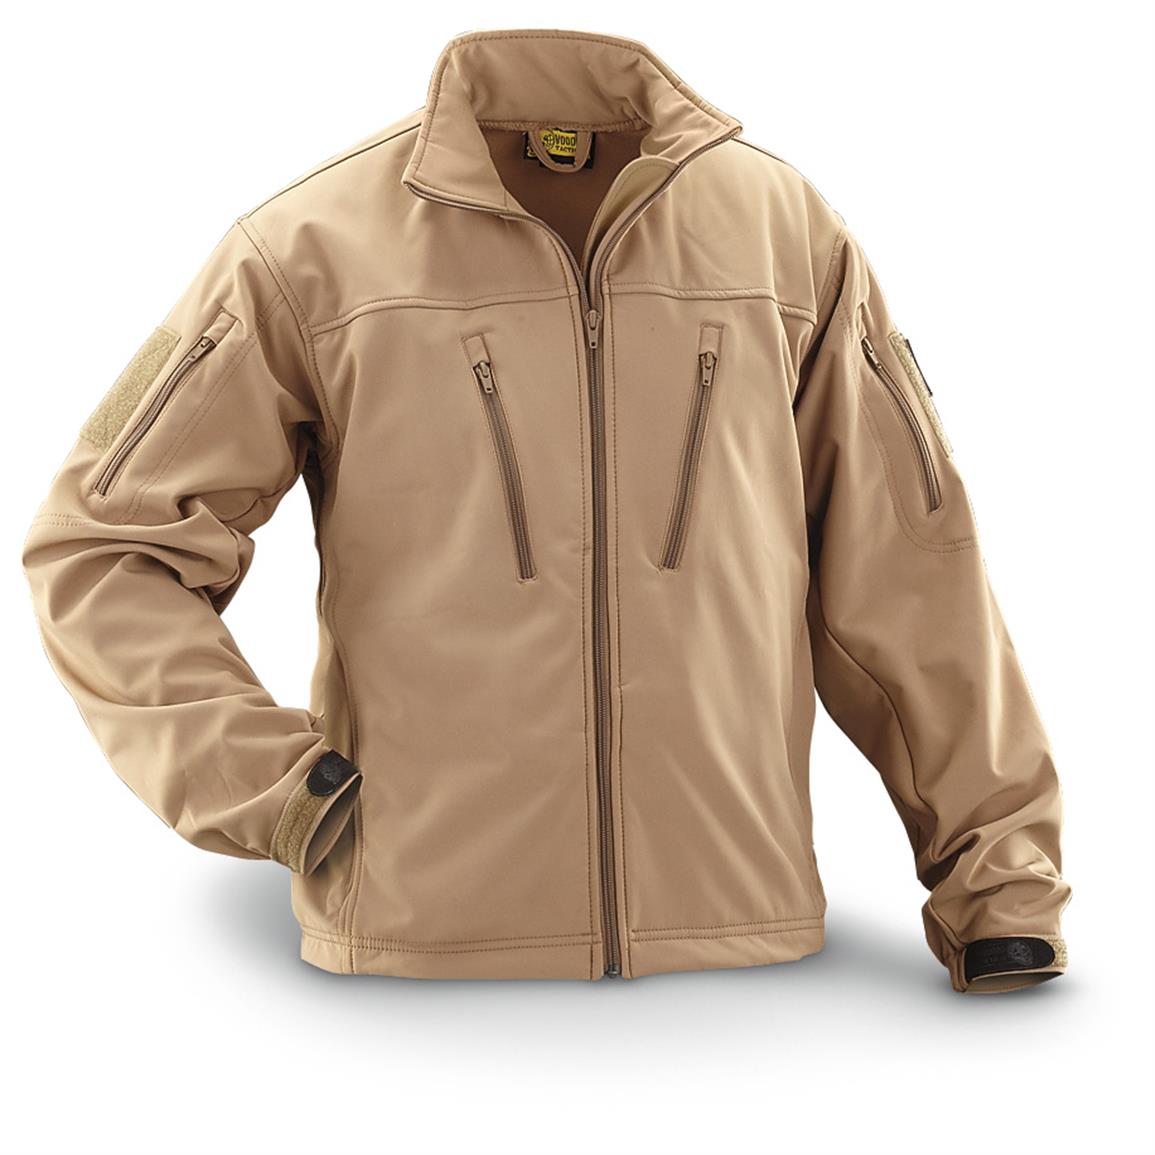 Voodoo Tactical Military-style Jacket - 236569, Tactical Clothing at ...